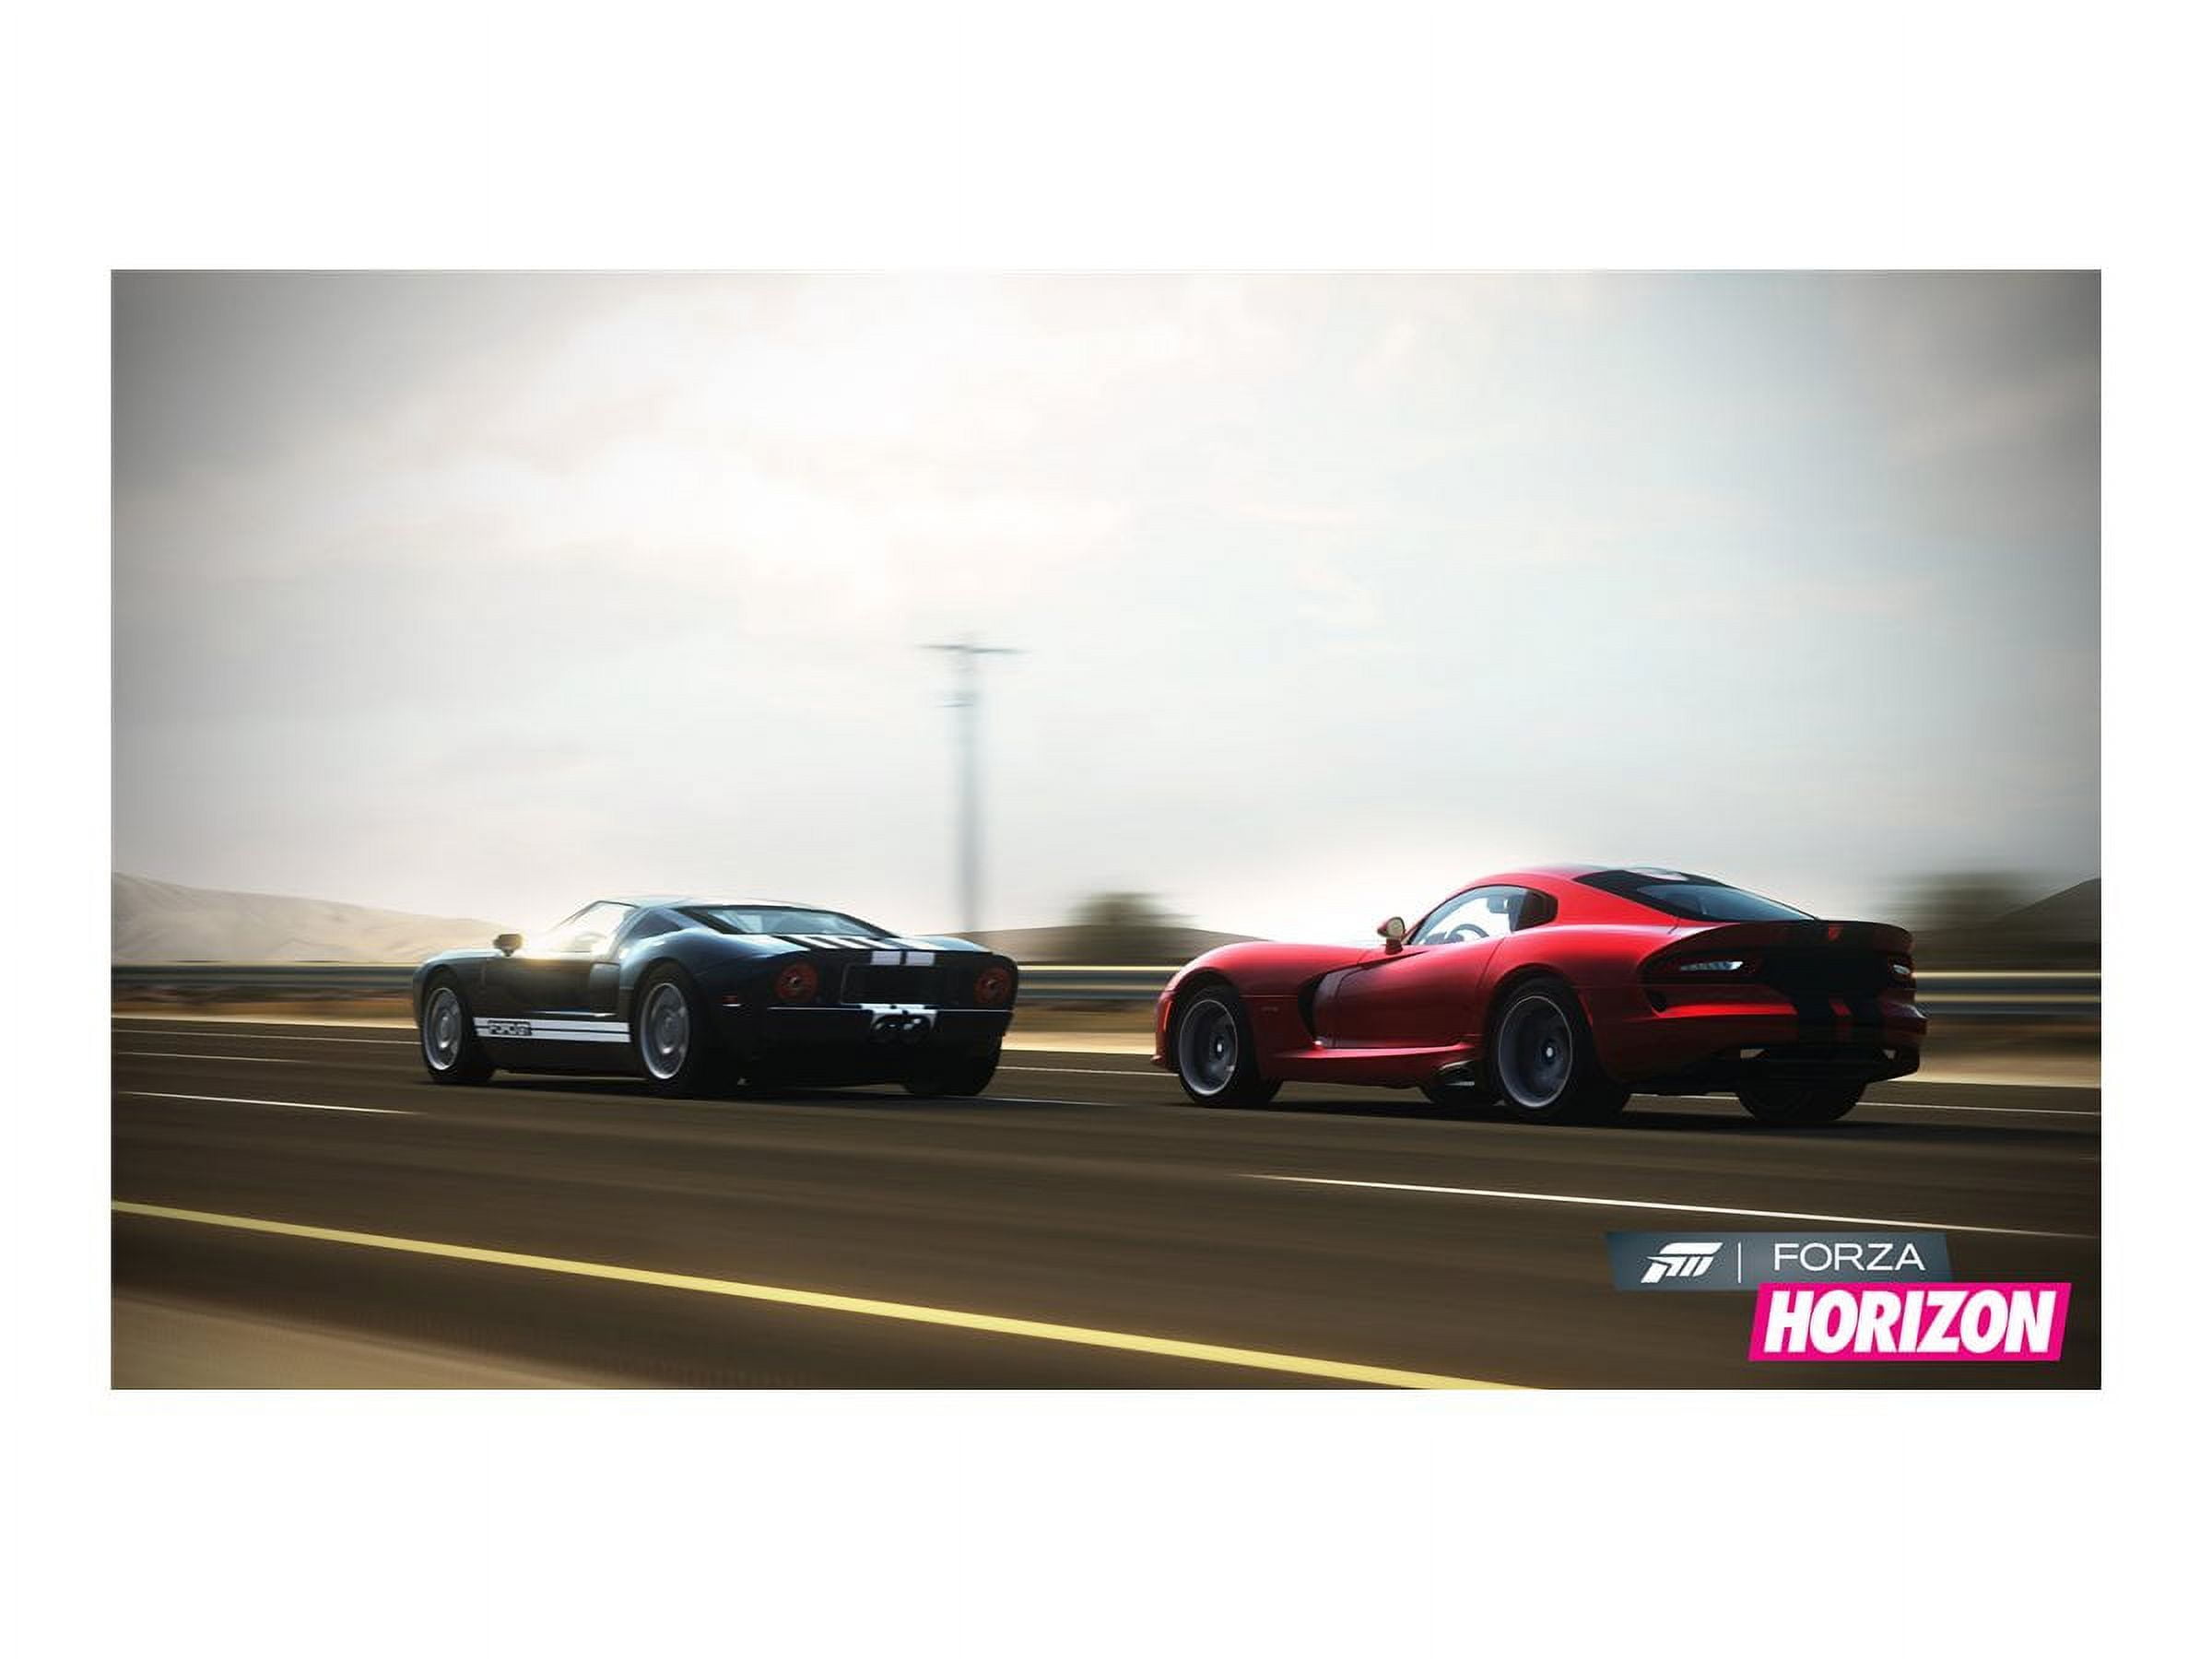 PSA: Free Xbox One Forza Horizon 2 Cars Available for a Limited